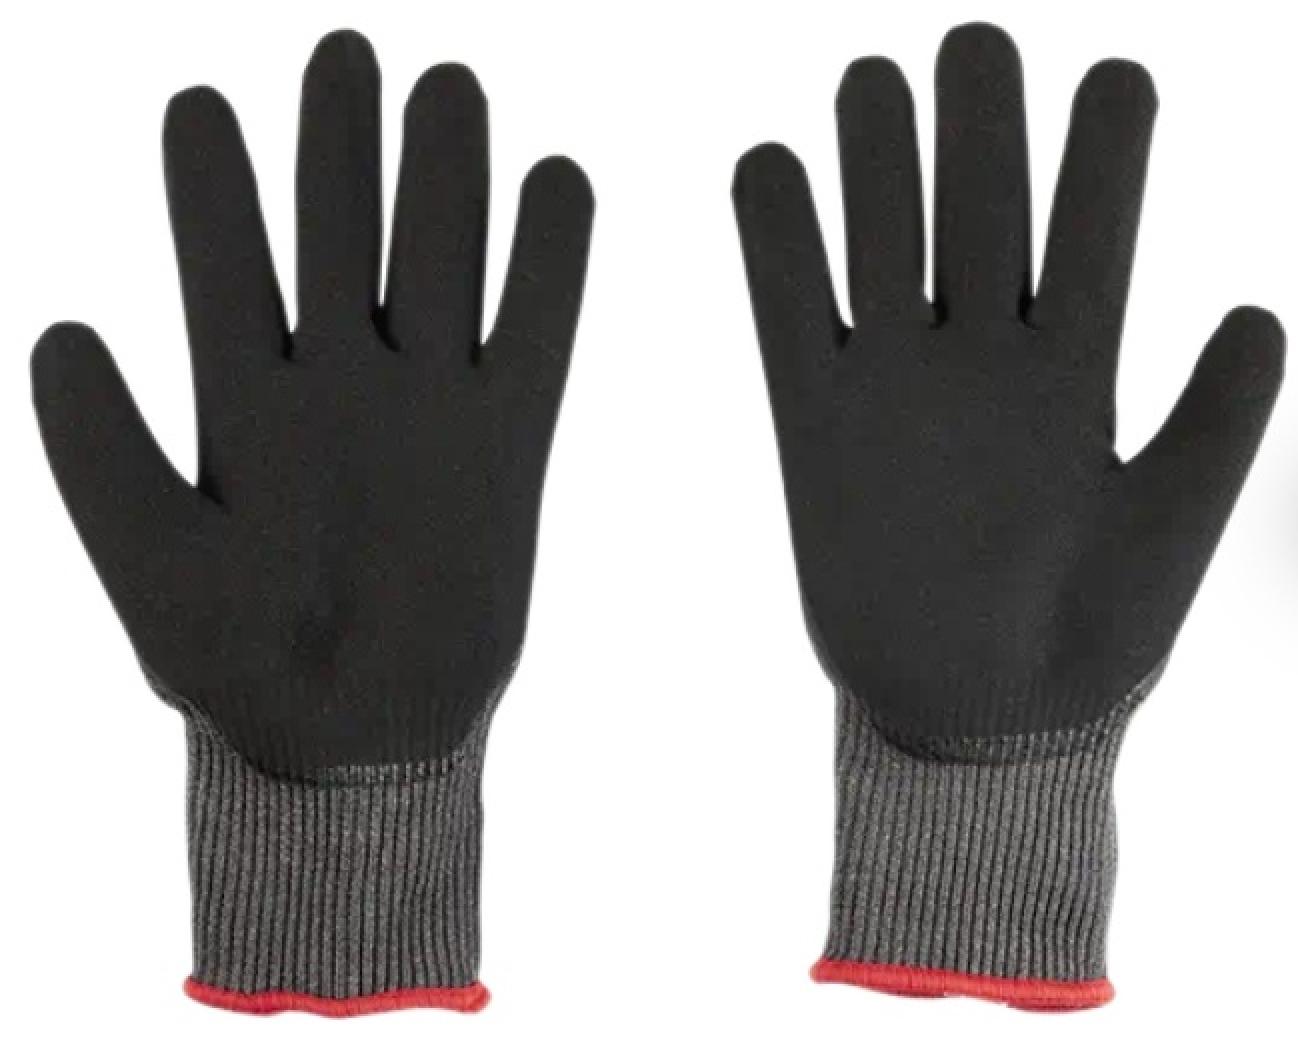 Milwaukee Cut Level 5 Nitrile Dipped Gloves Palms of Gloves